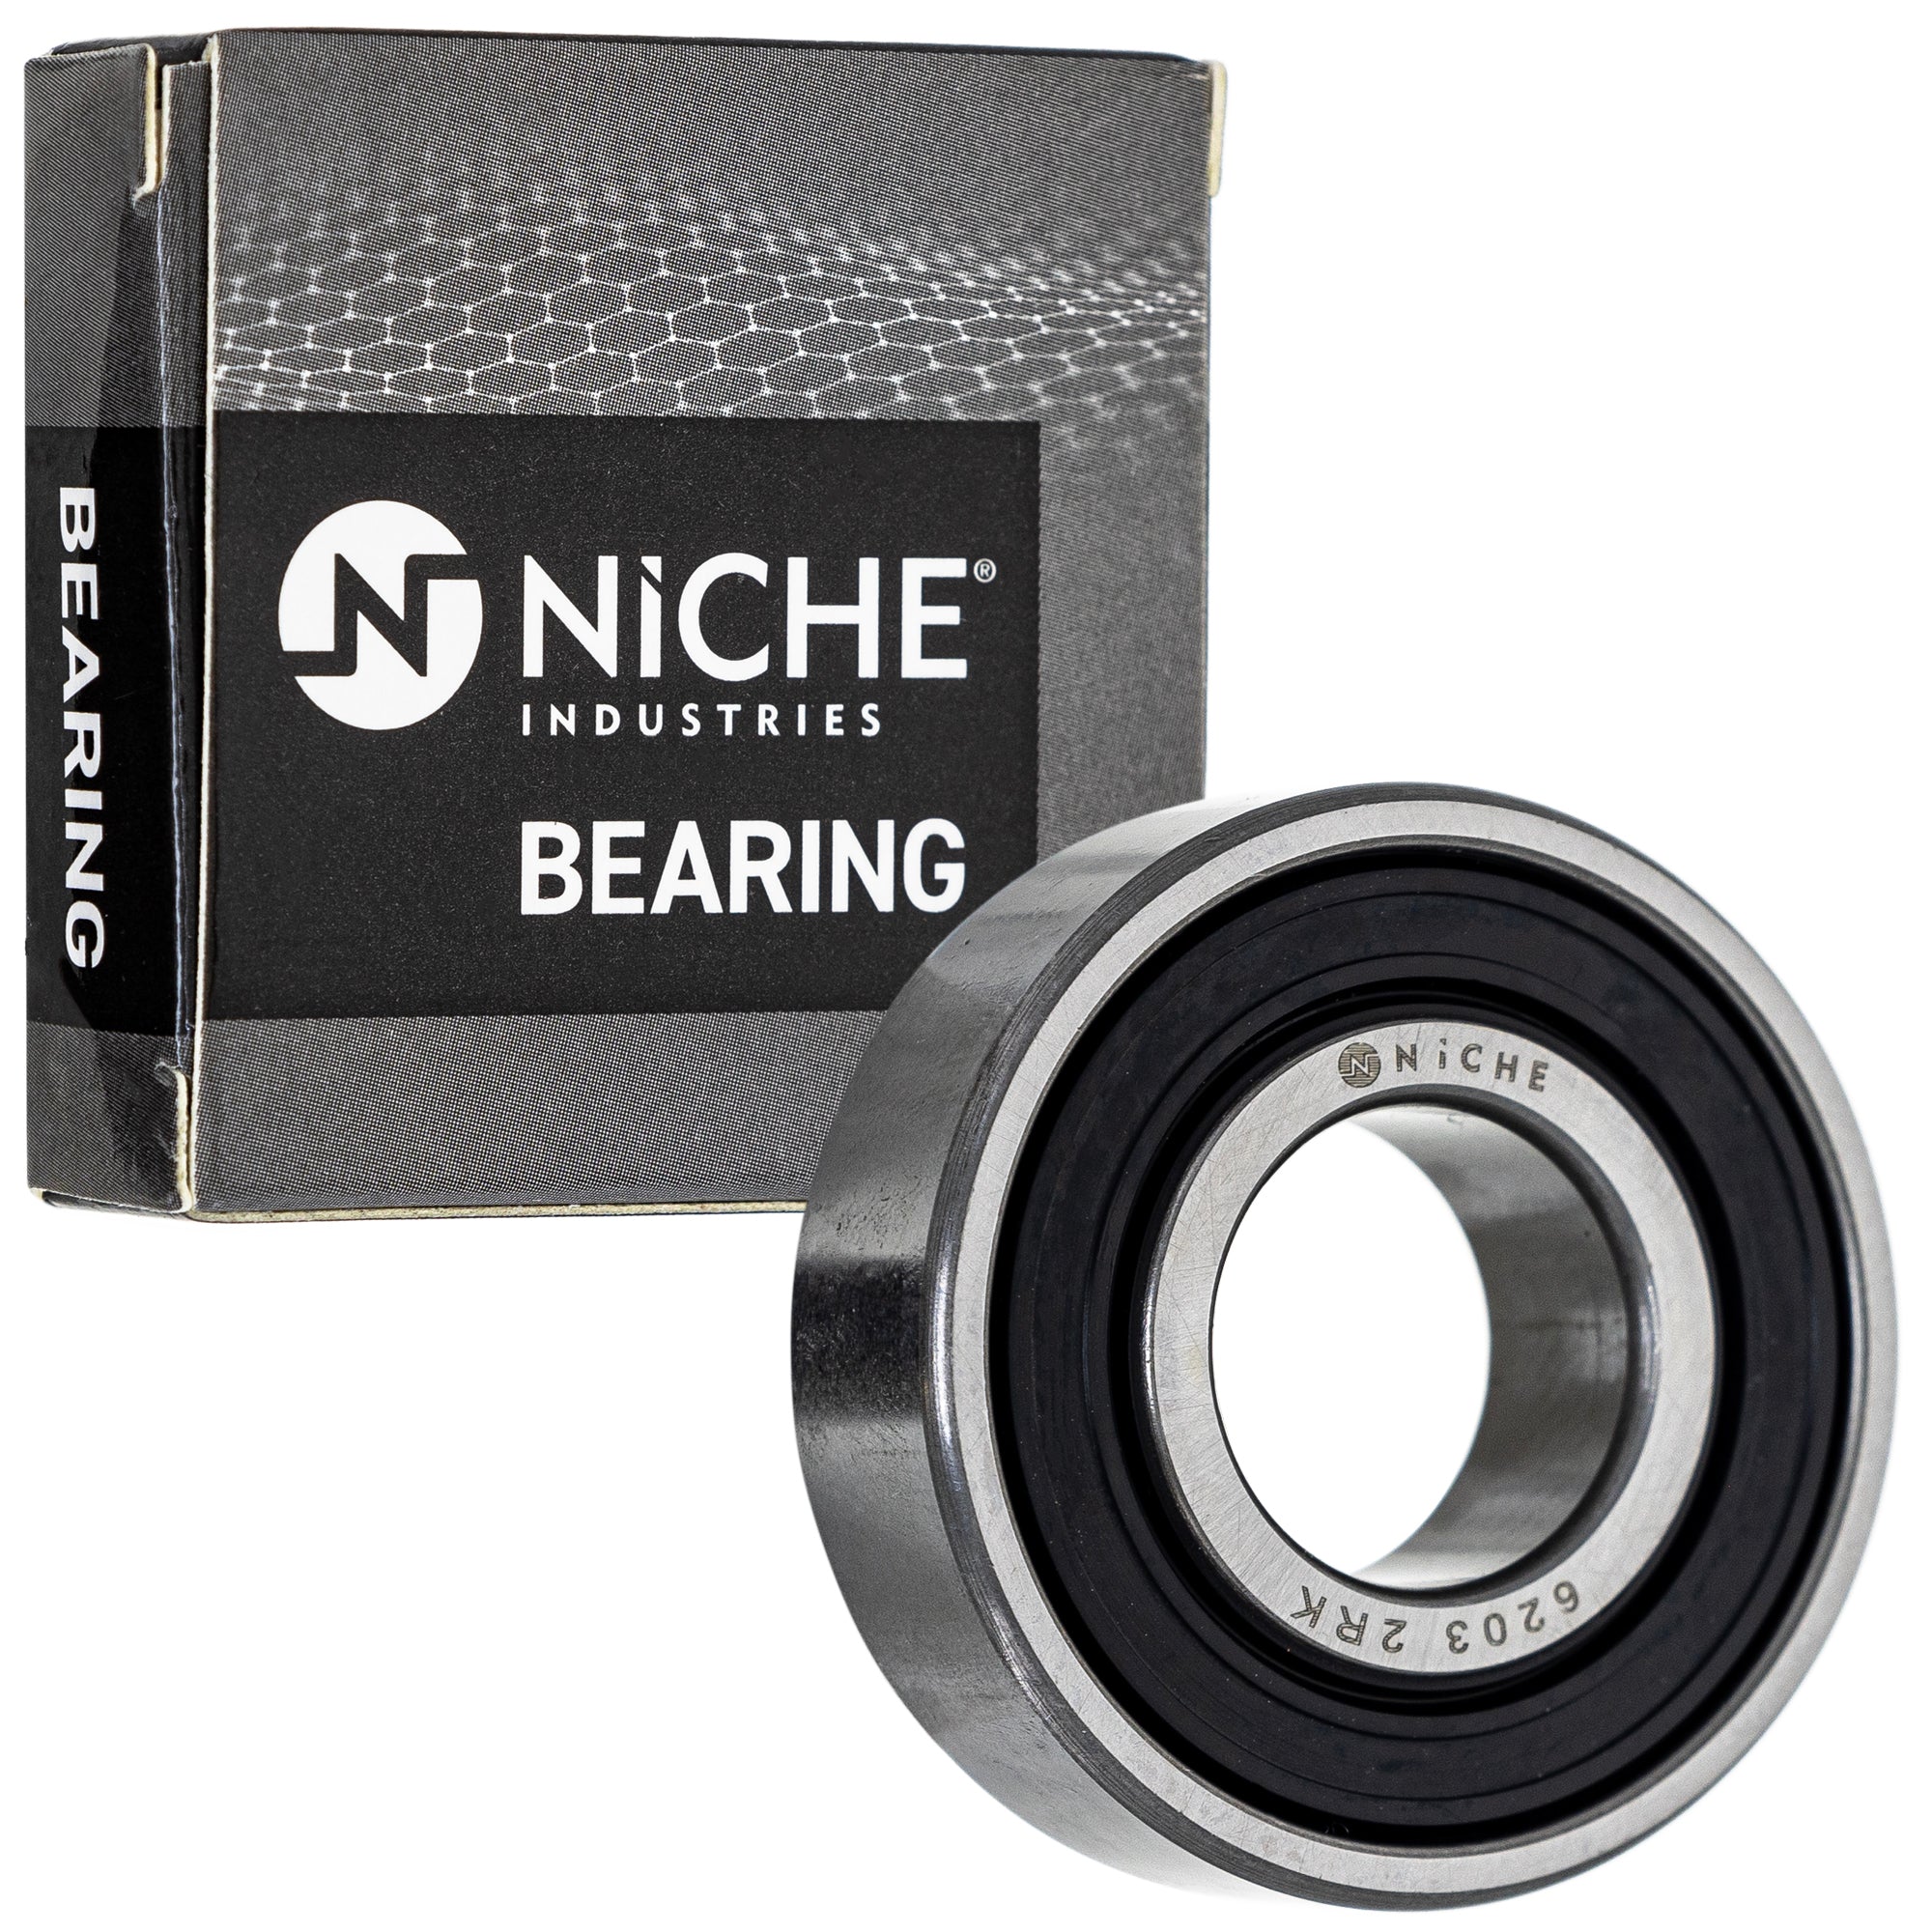 NICHE 519-CBB2280R Bearing 10-Pack for zOTHER SRX600 IT200 Grizzly